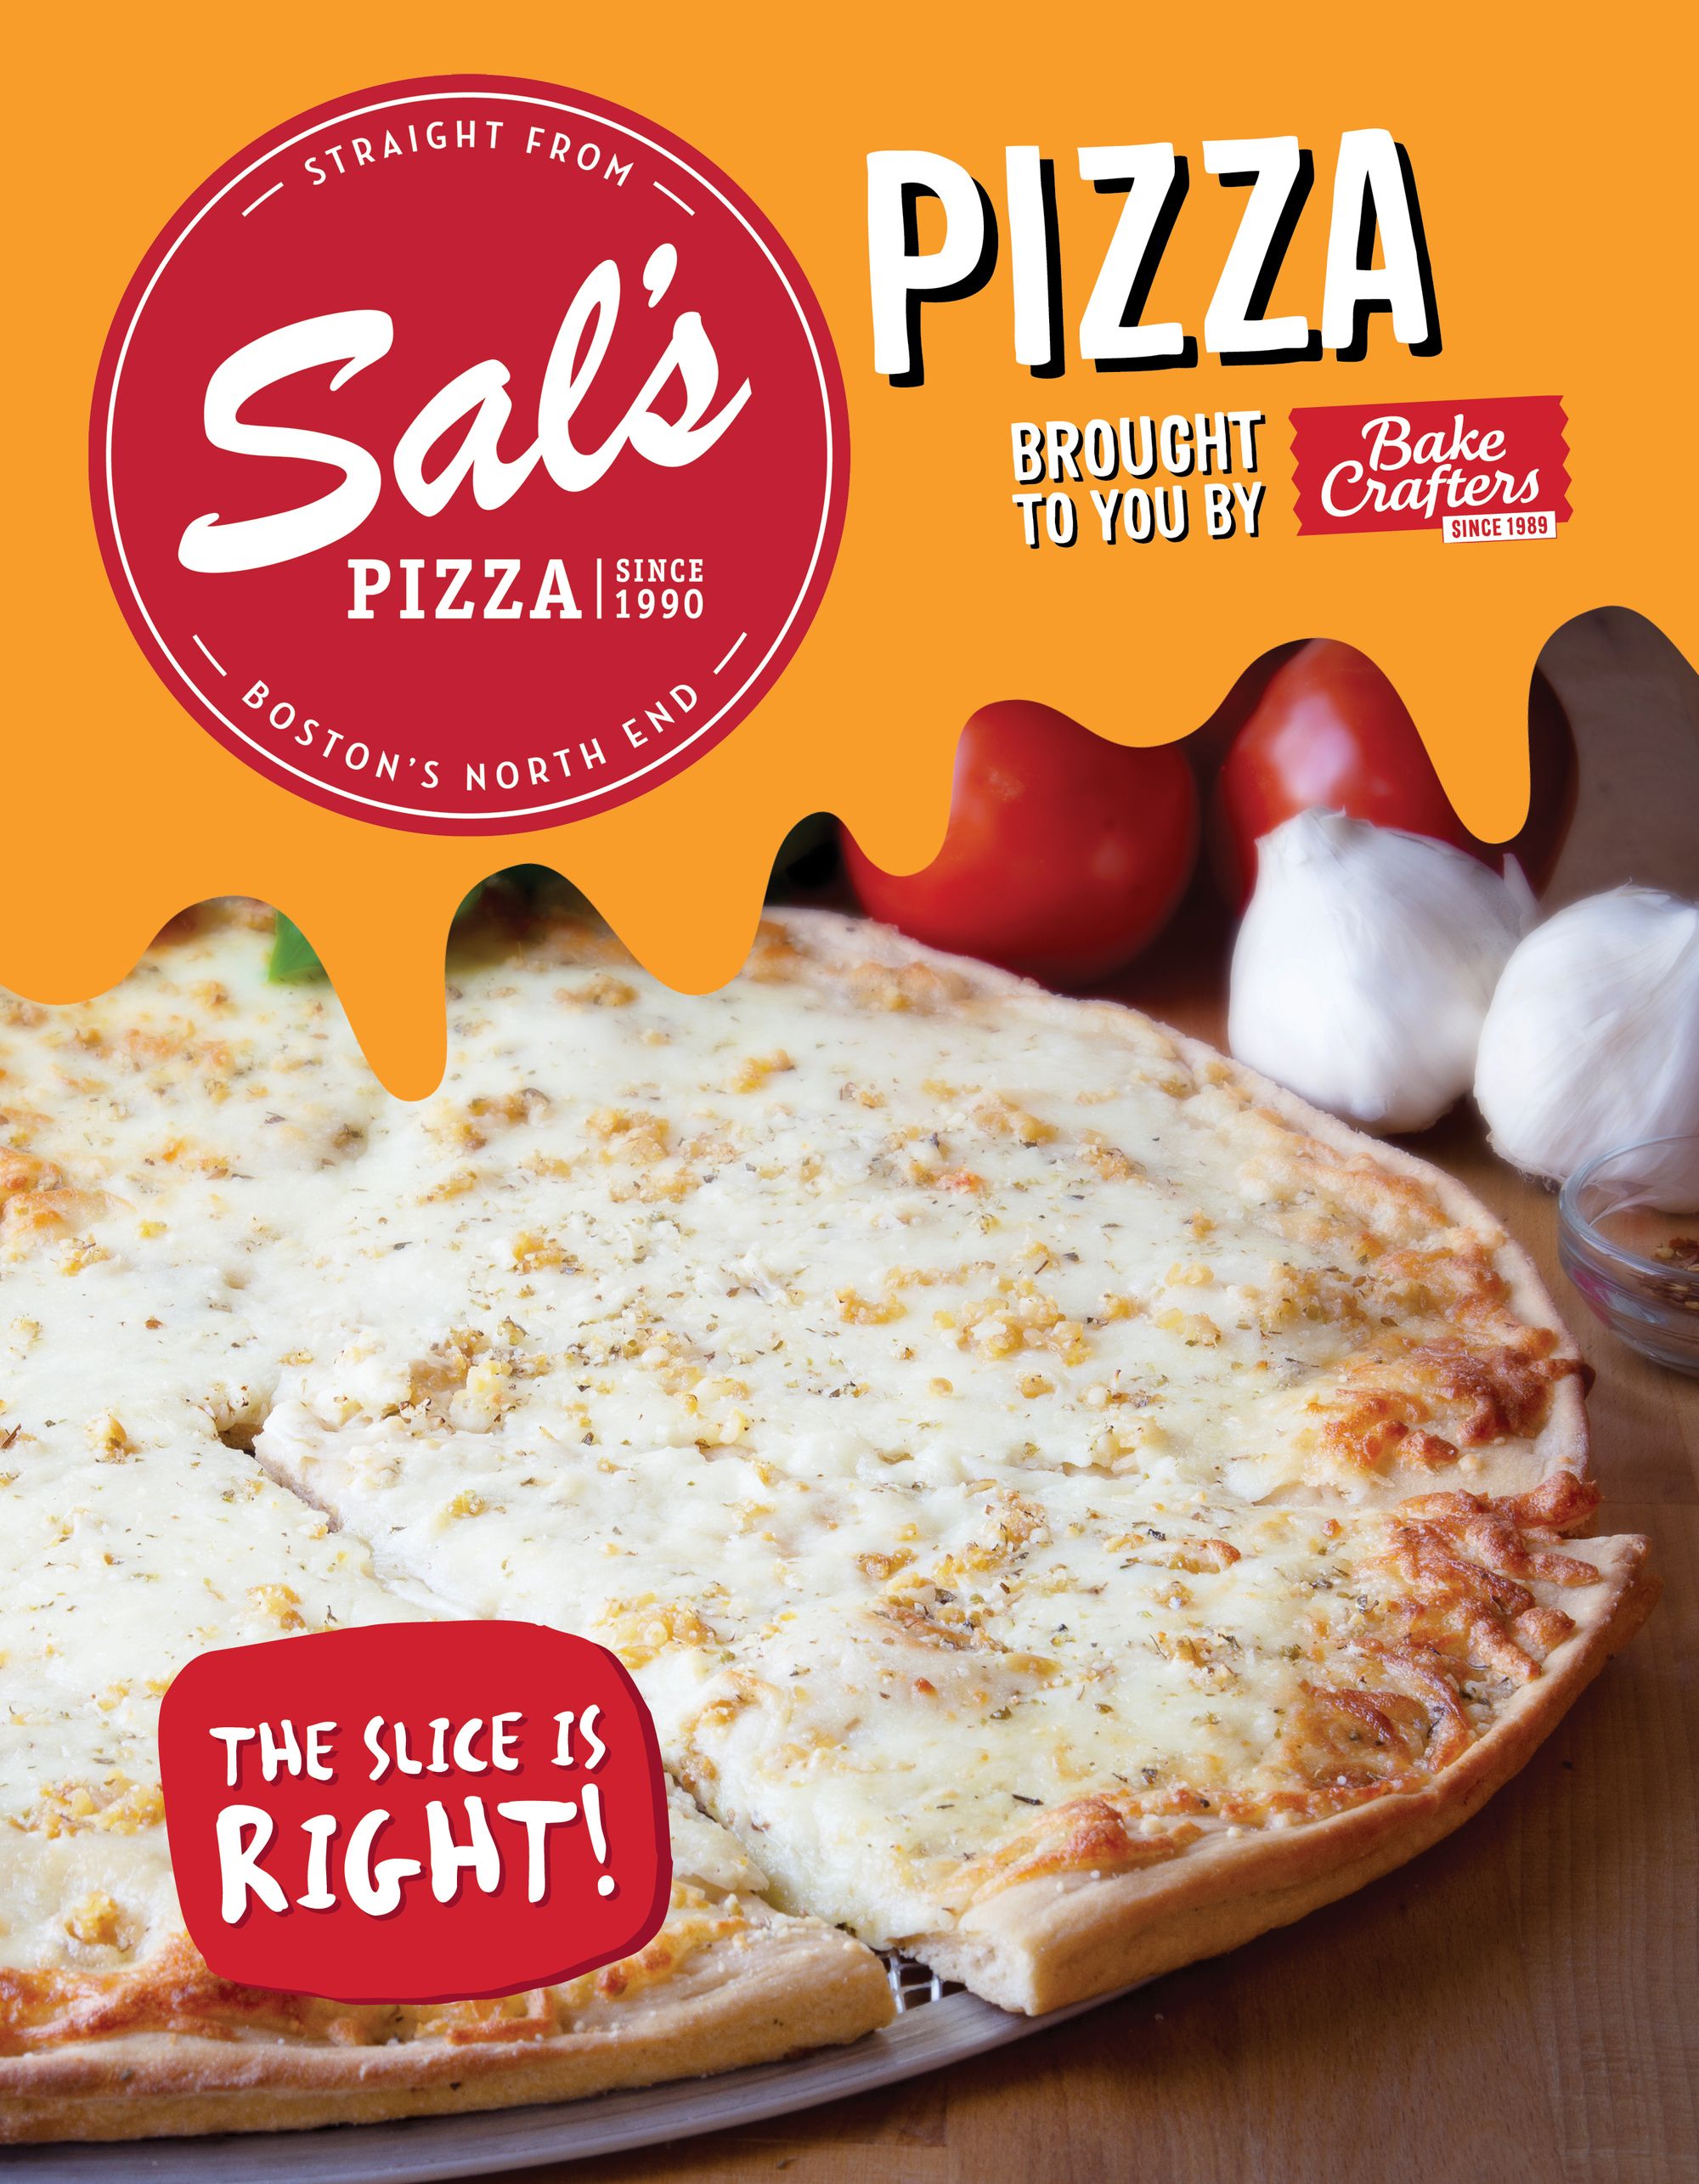 Introducing Sal's Pizza! – Brought to You by Bake Crafters!